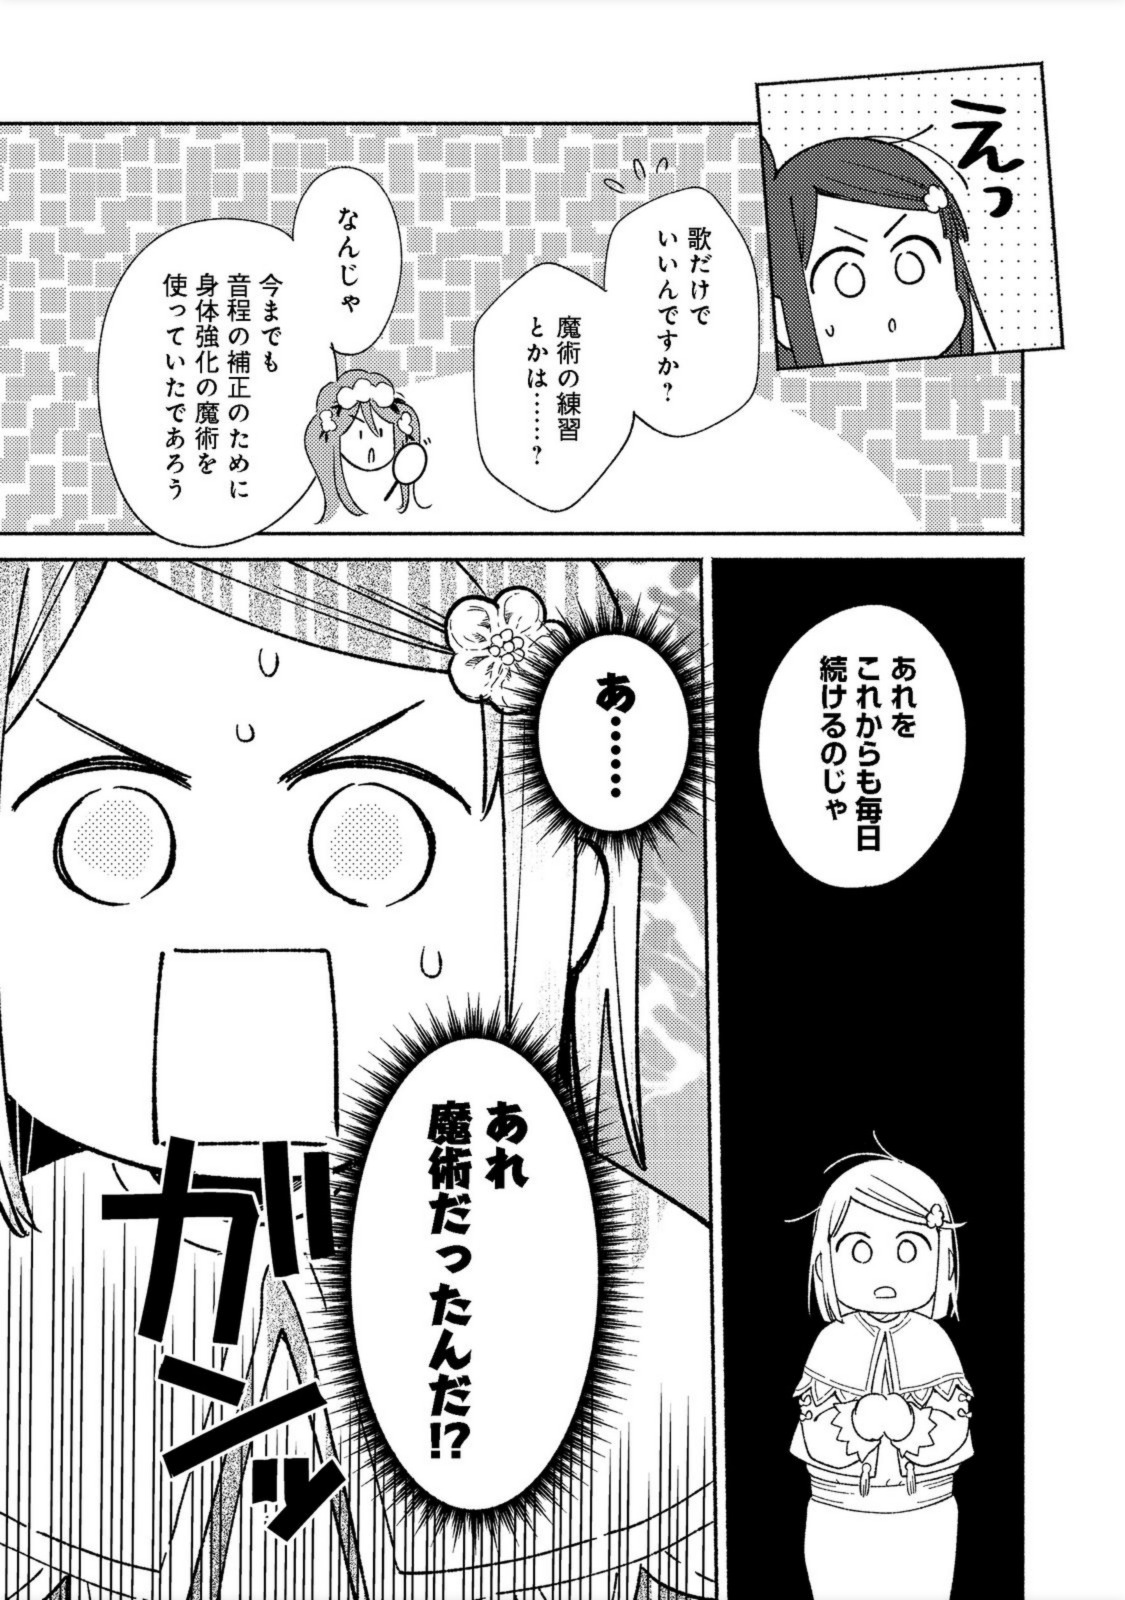 I’m the White Pig Nobleman 第14.1話 - Page 5